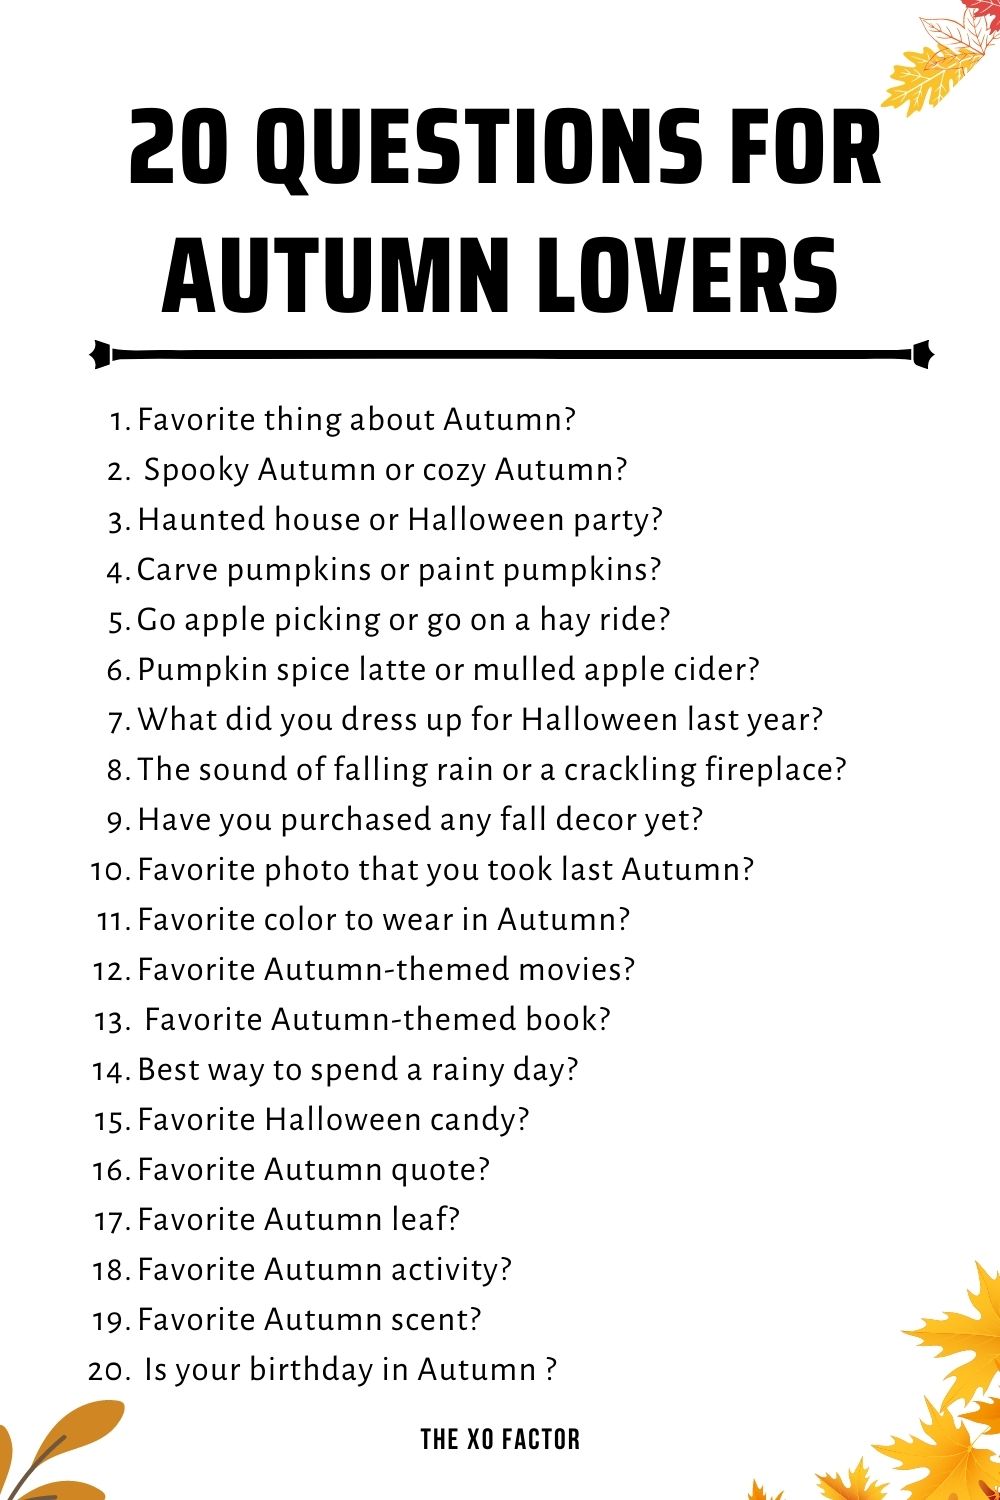  20 Questions For Autumn Lovers